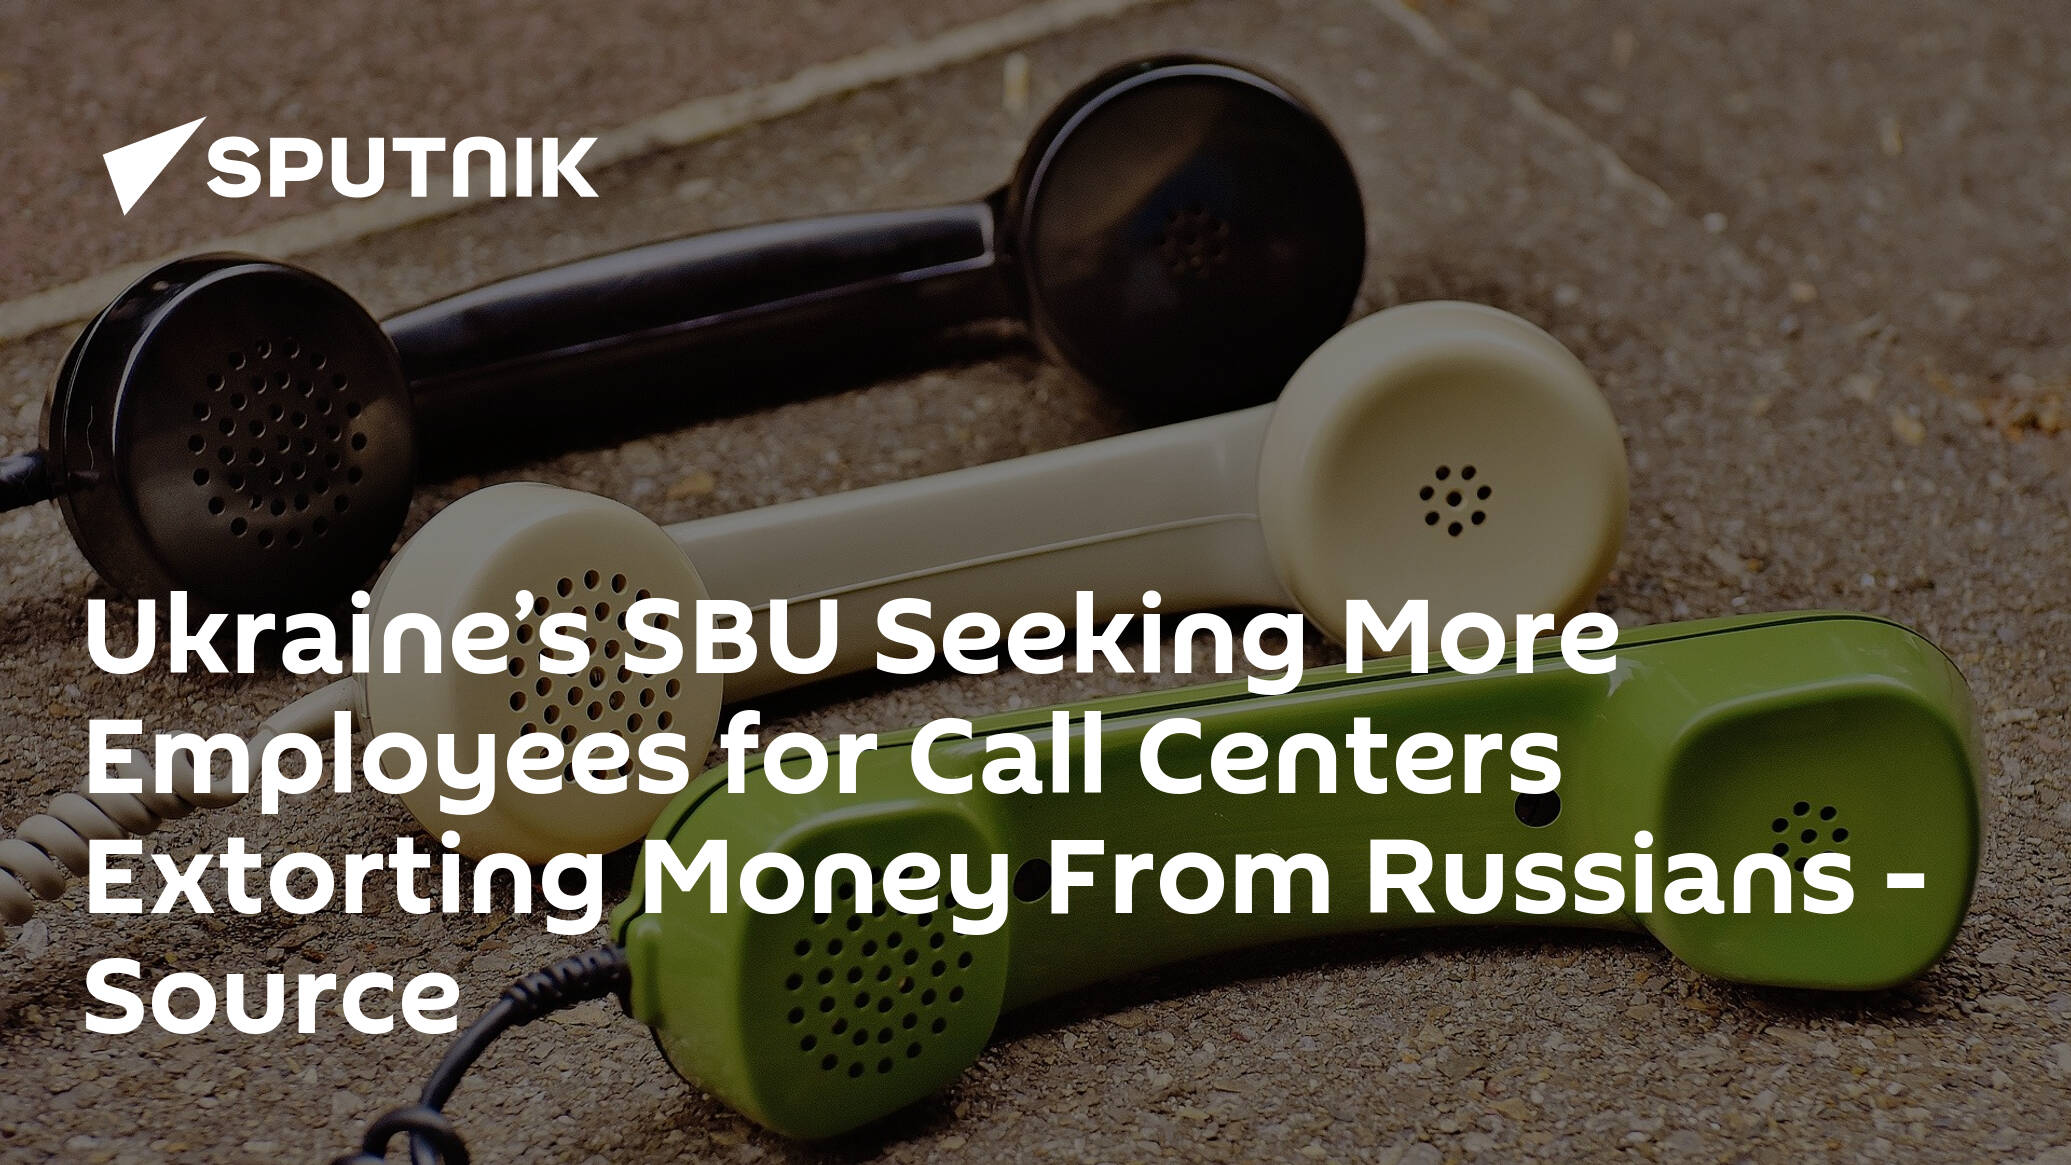 Ukraine’s SBU Seeking More Employees for Call Centers Extorting Money From Russians -Source